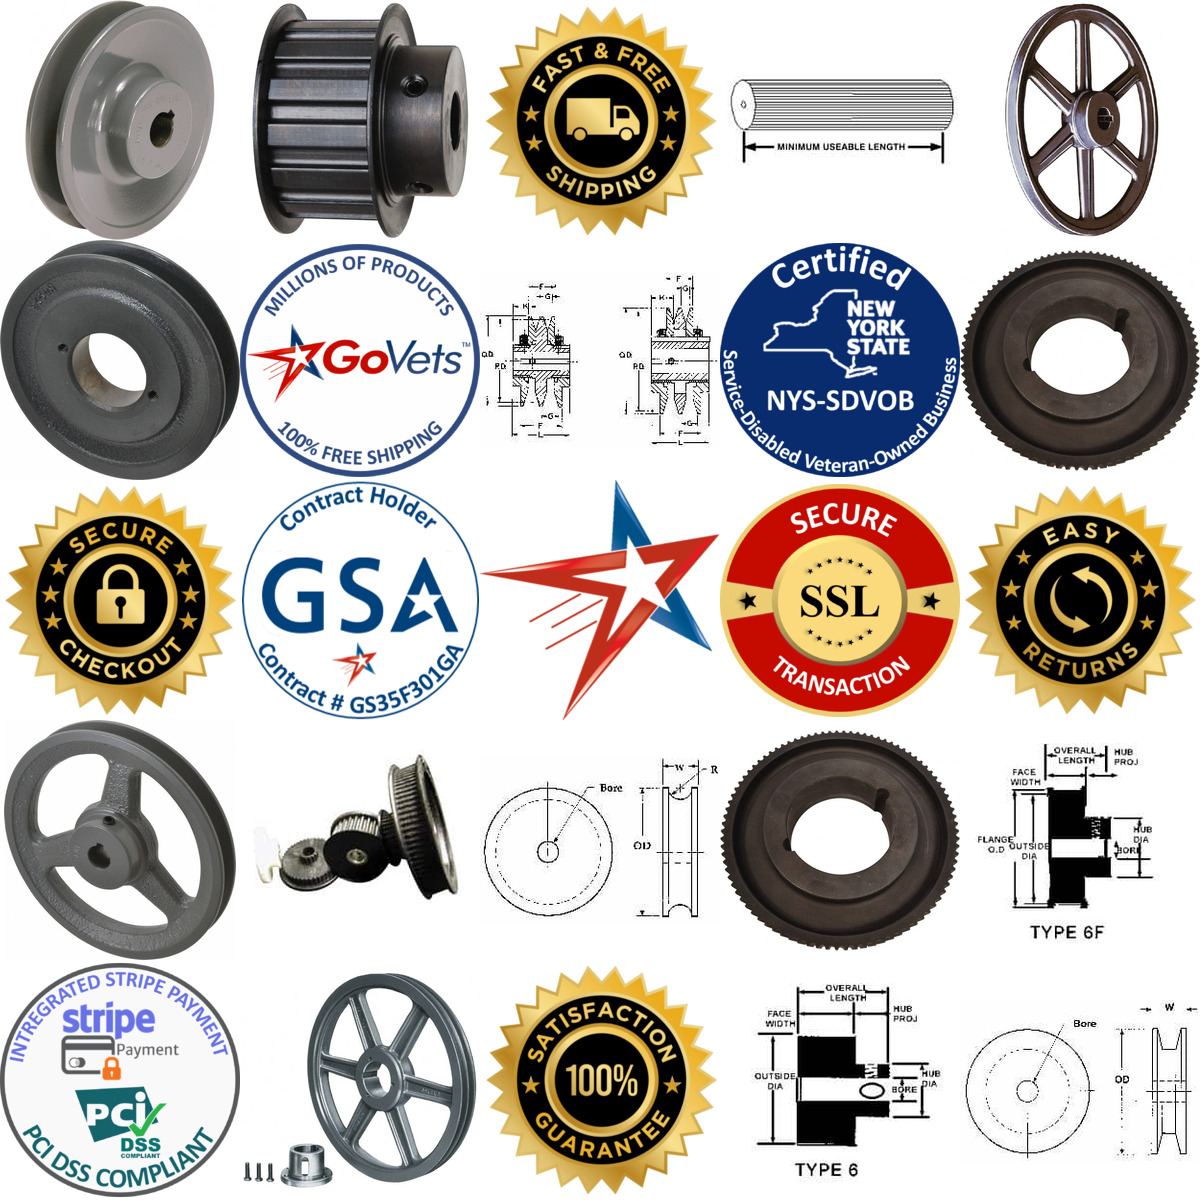 A selection of Sheaves and Pulleys products on GoVets